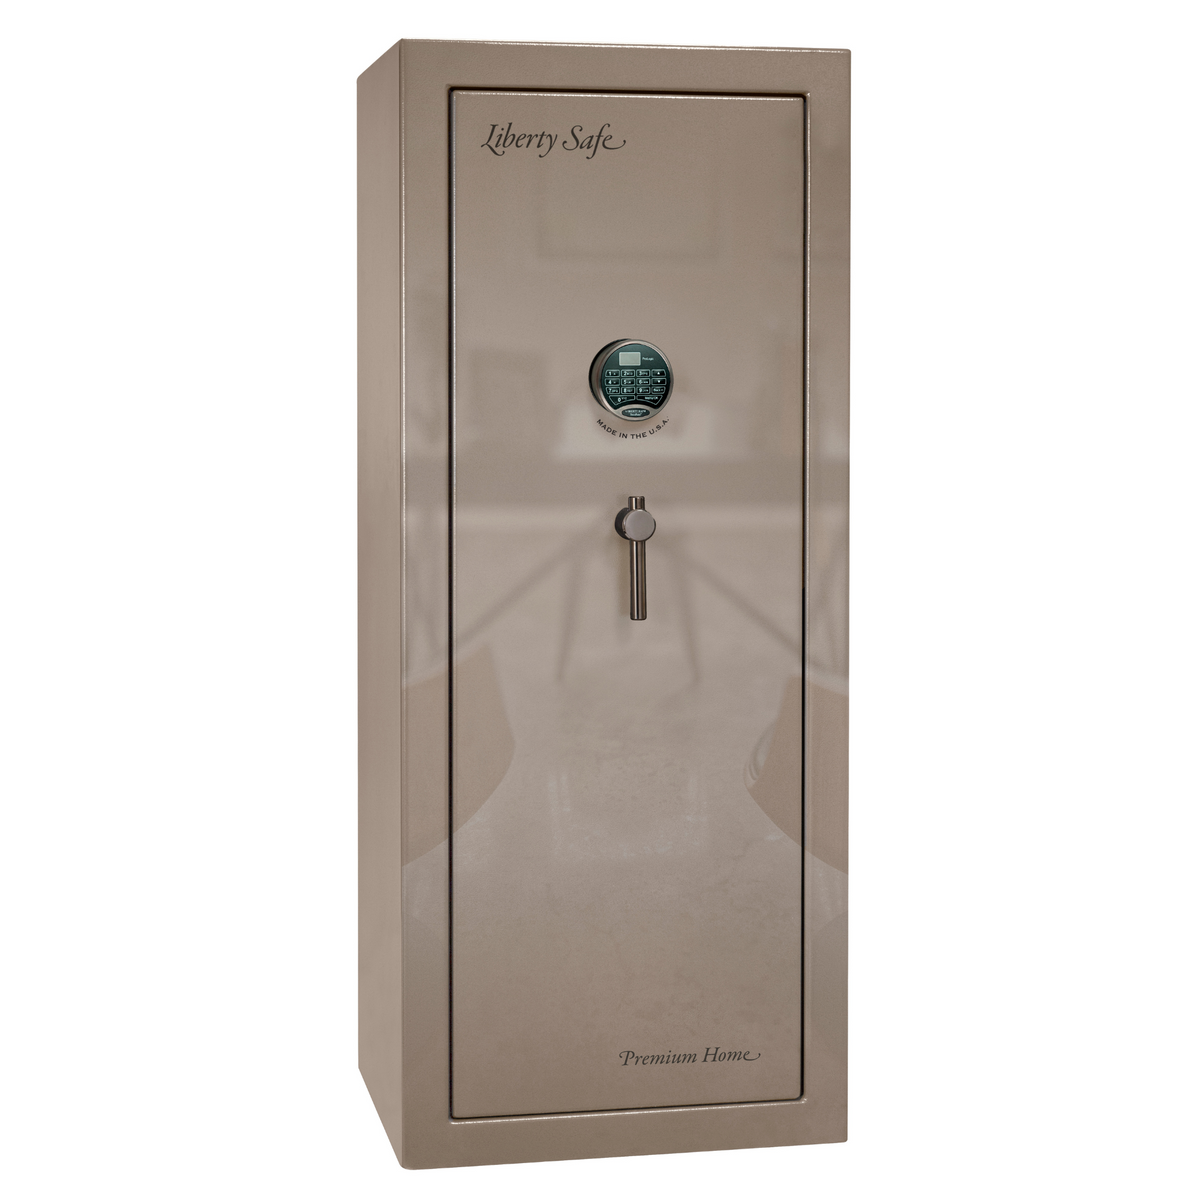 Premium Home Series | Level 7 Security | 2 Hour Fire Protection | 17 | Dimensions: 60.25&quot;(H) x 24.5&quot;(W) x 19&quot;(D) | Champagne Gloss Brass - Closed Door